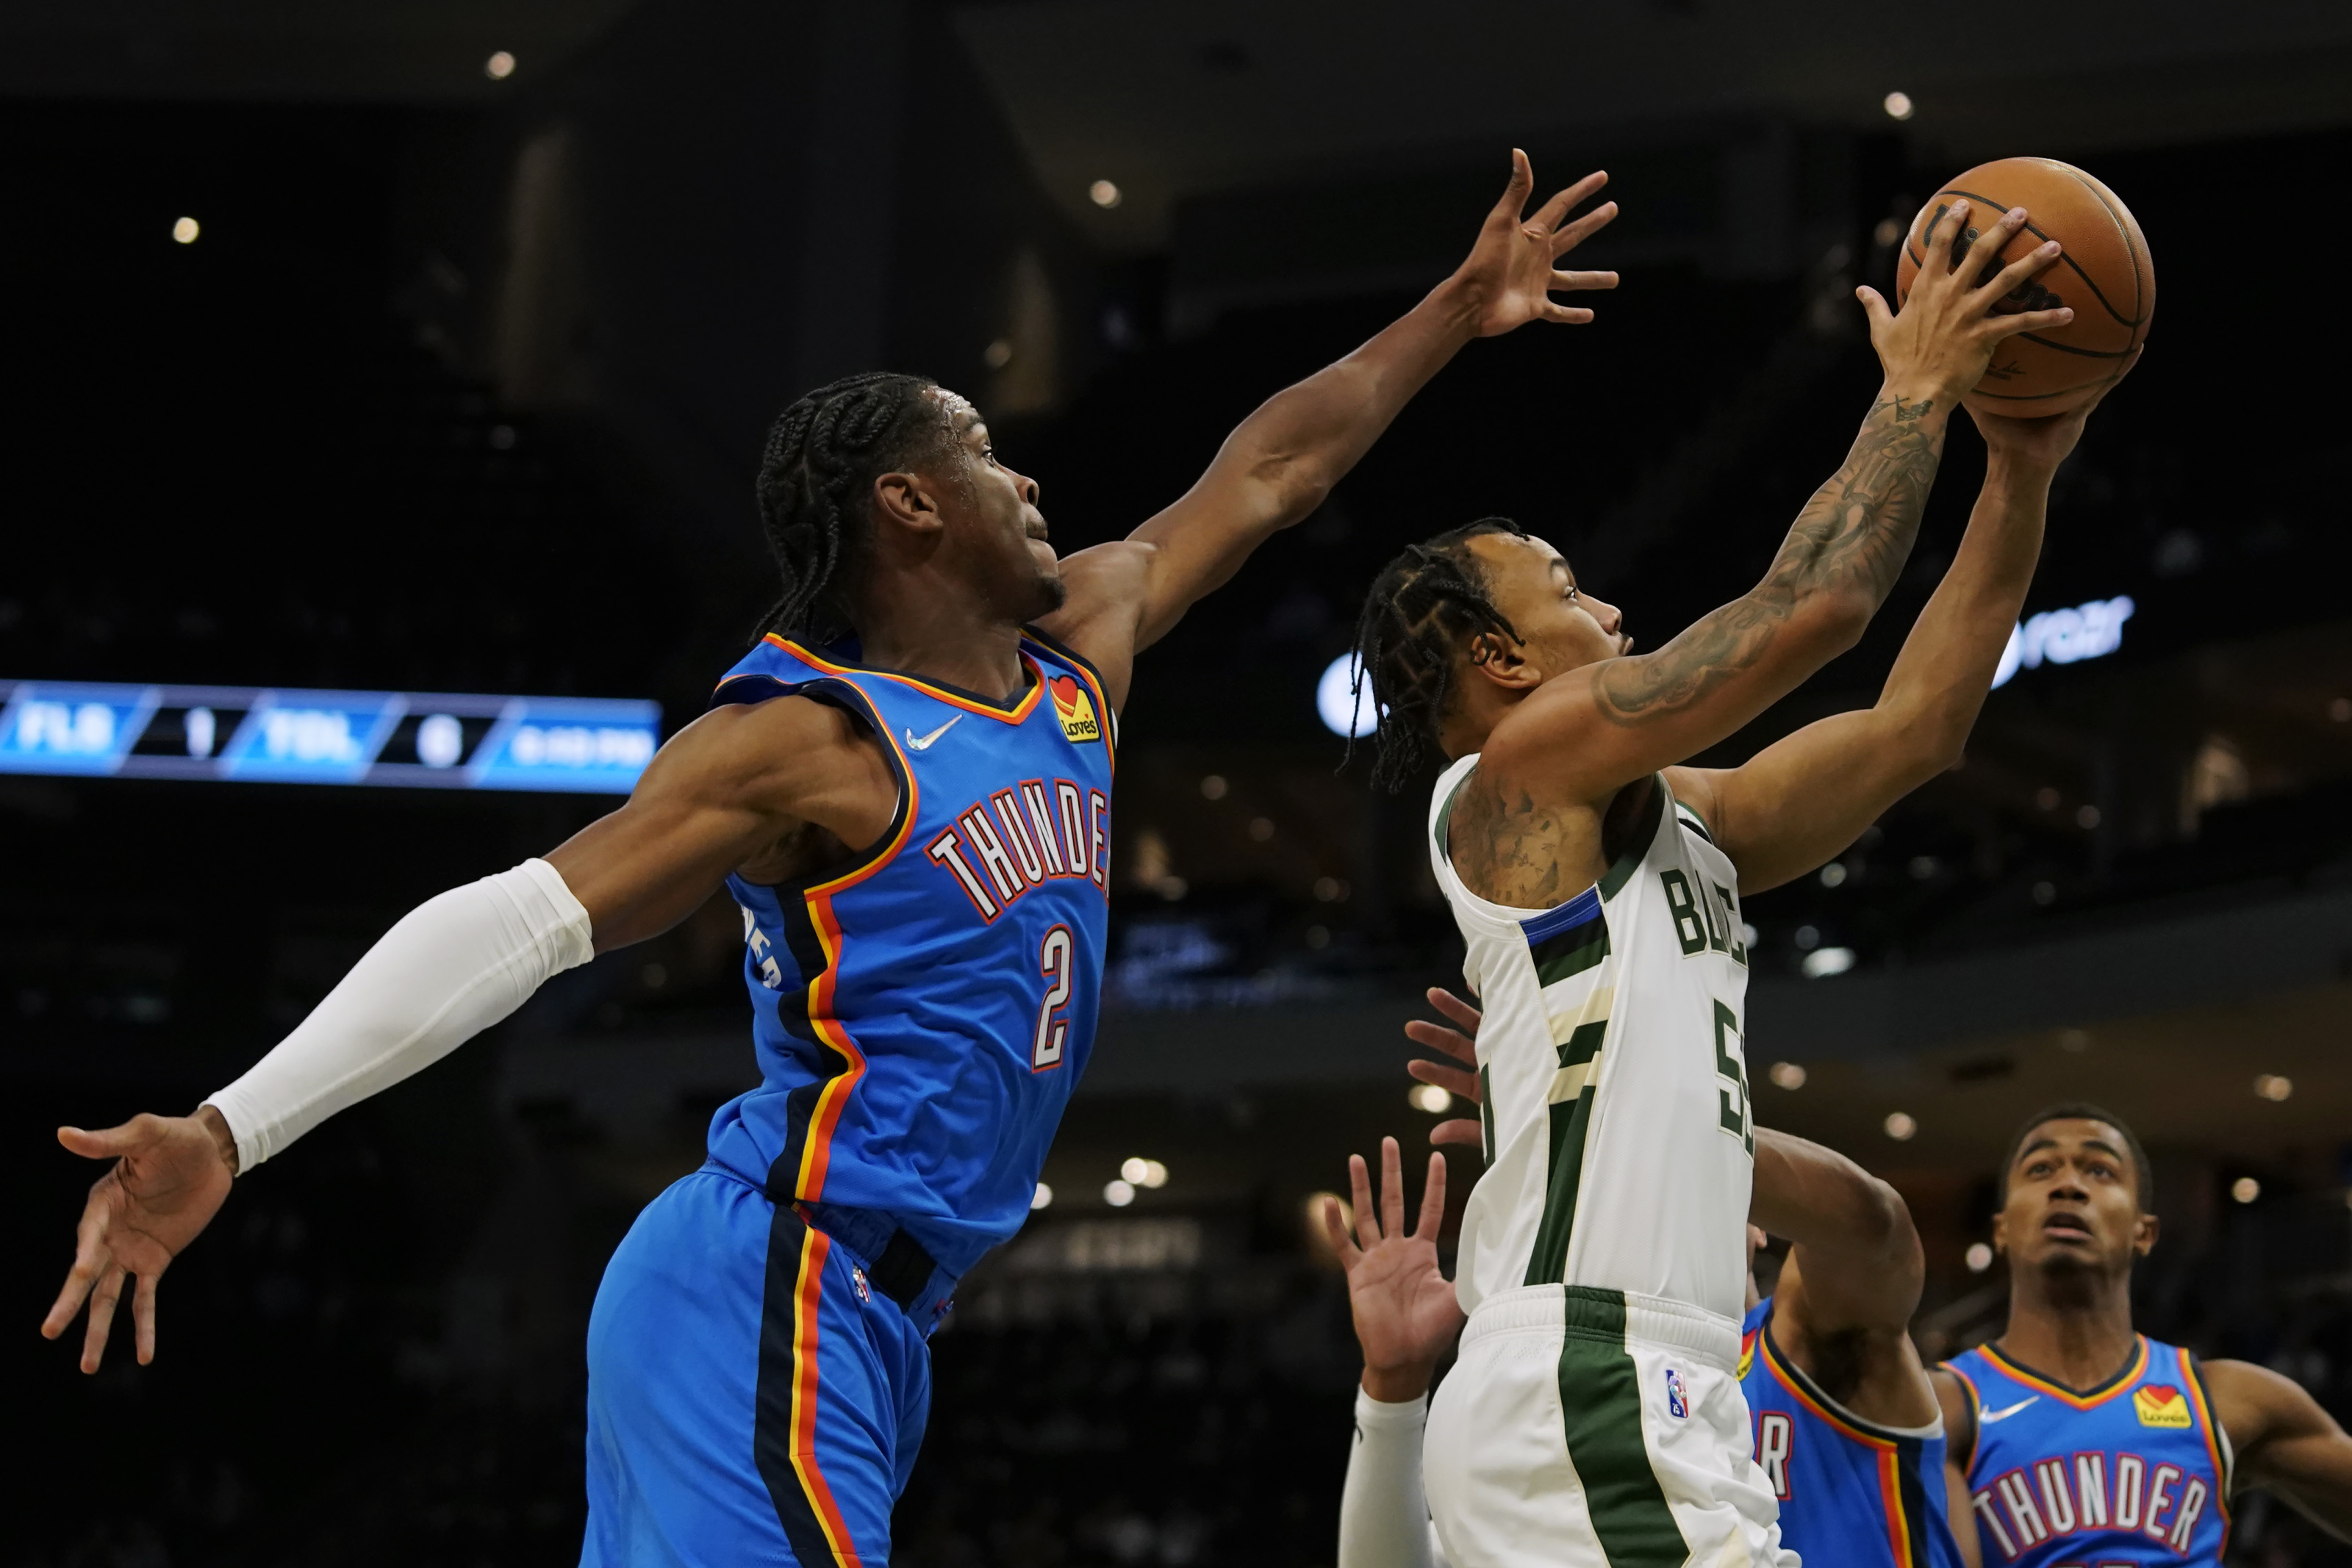 Derrick Favors of the Oklahoma City Thunder shoots the ball during